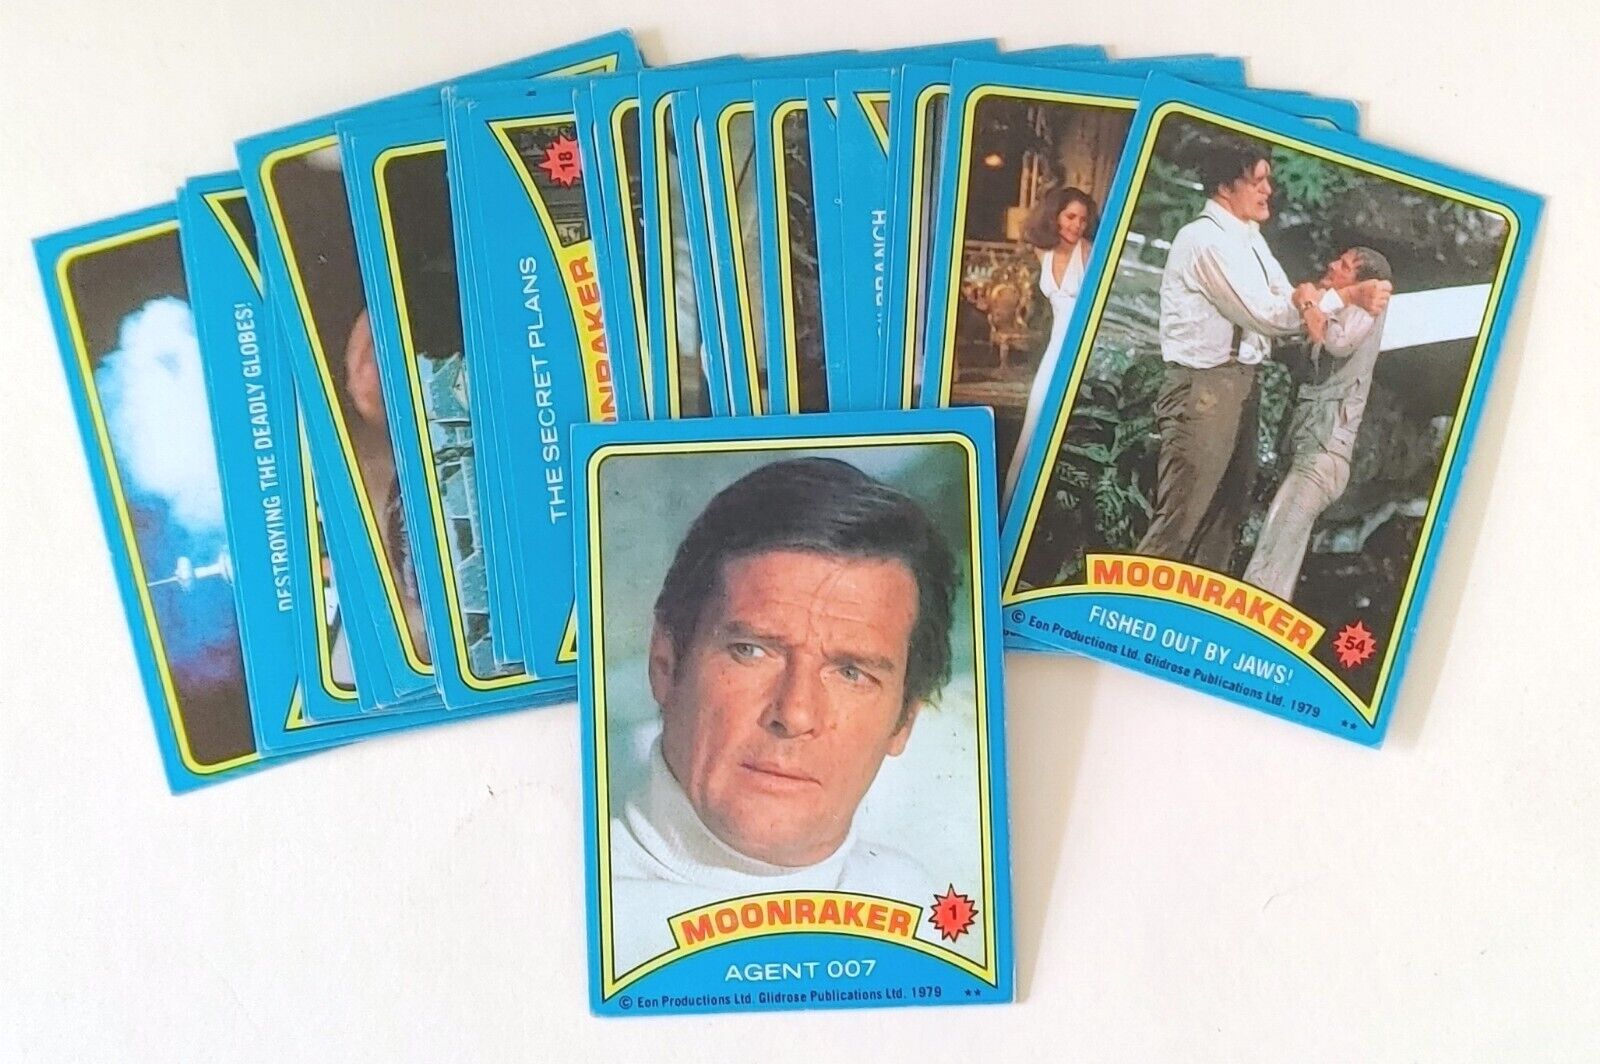 James Bond 007 - 1979 Topps Moonraker Trading Card Lot of 25+ Cards & 9 Stickers